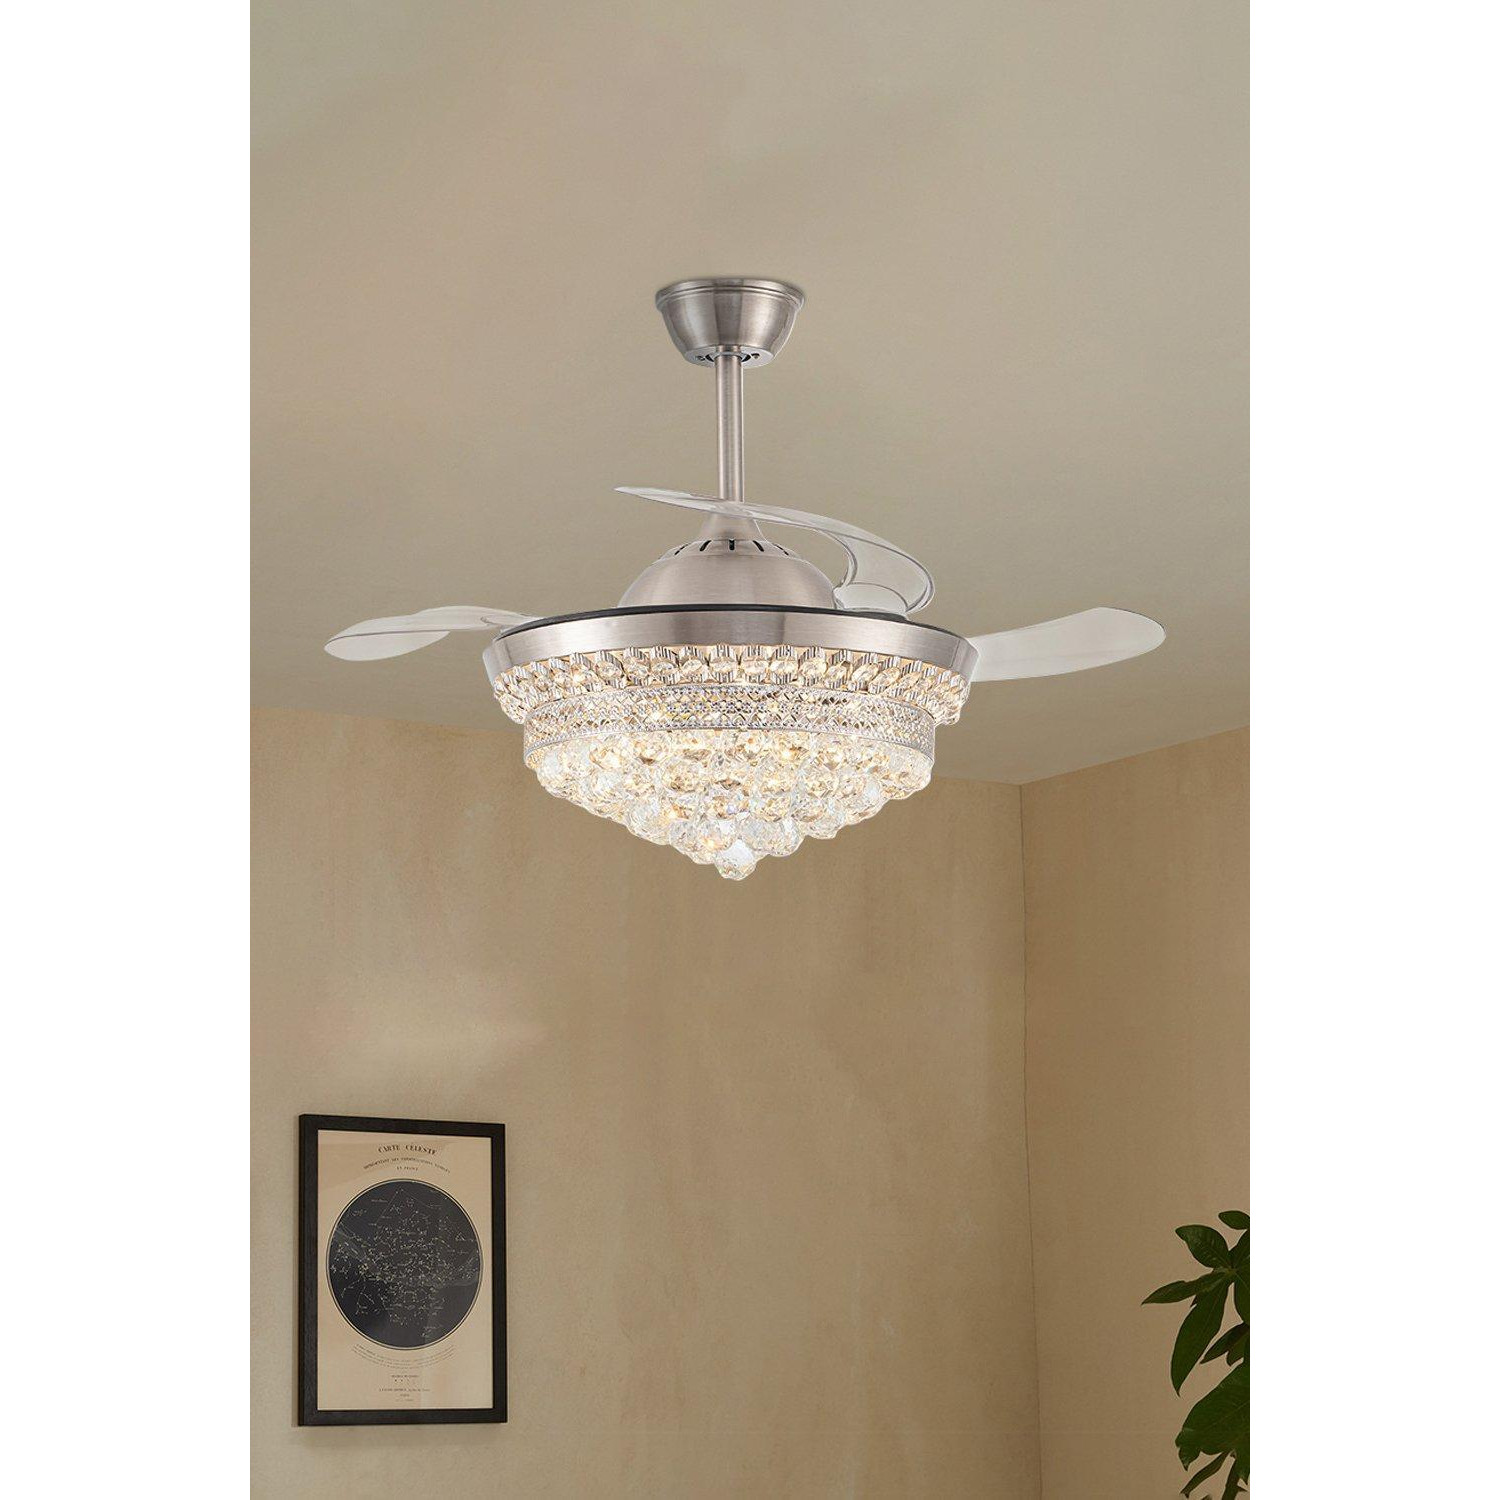 3 Blade Modern Crystal Ceiling Fan with LED Light - image 1